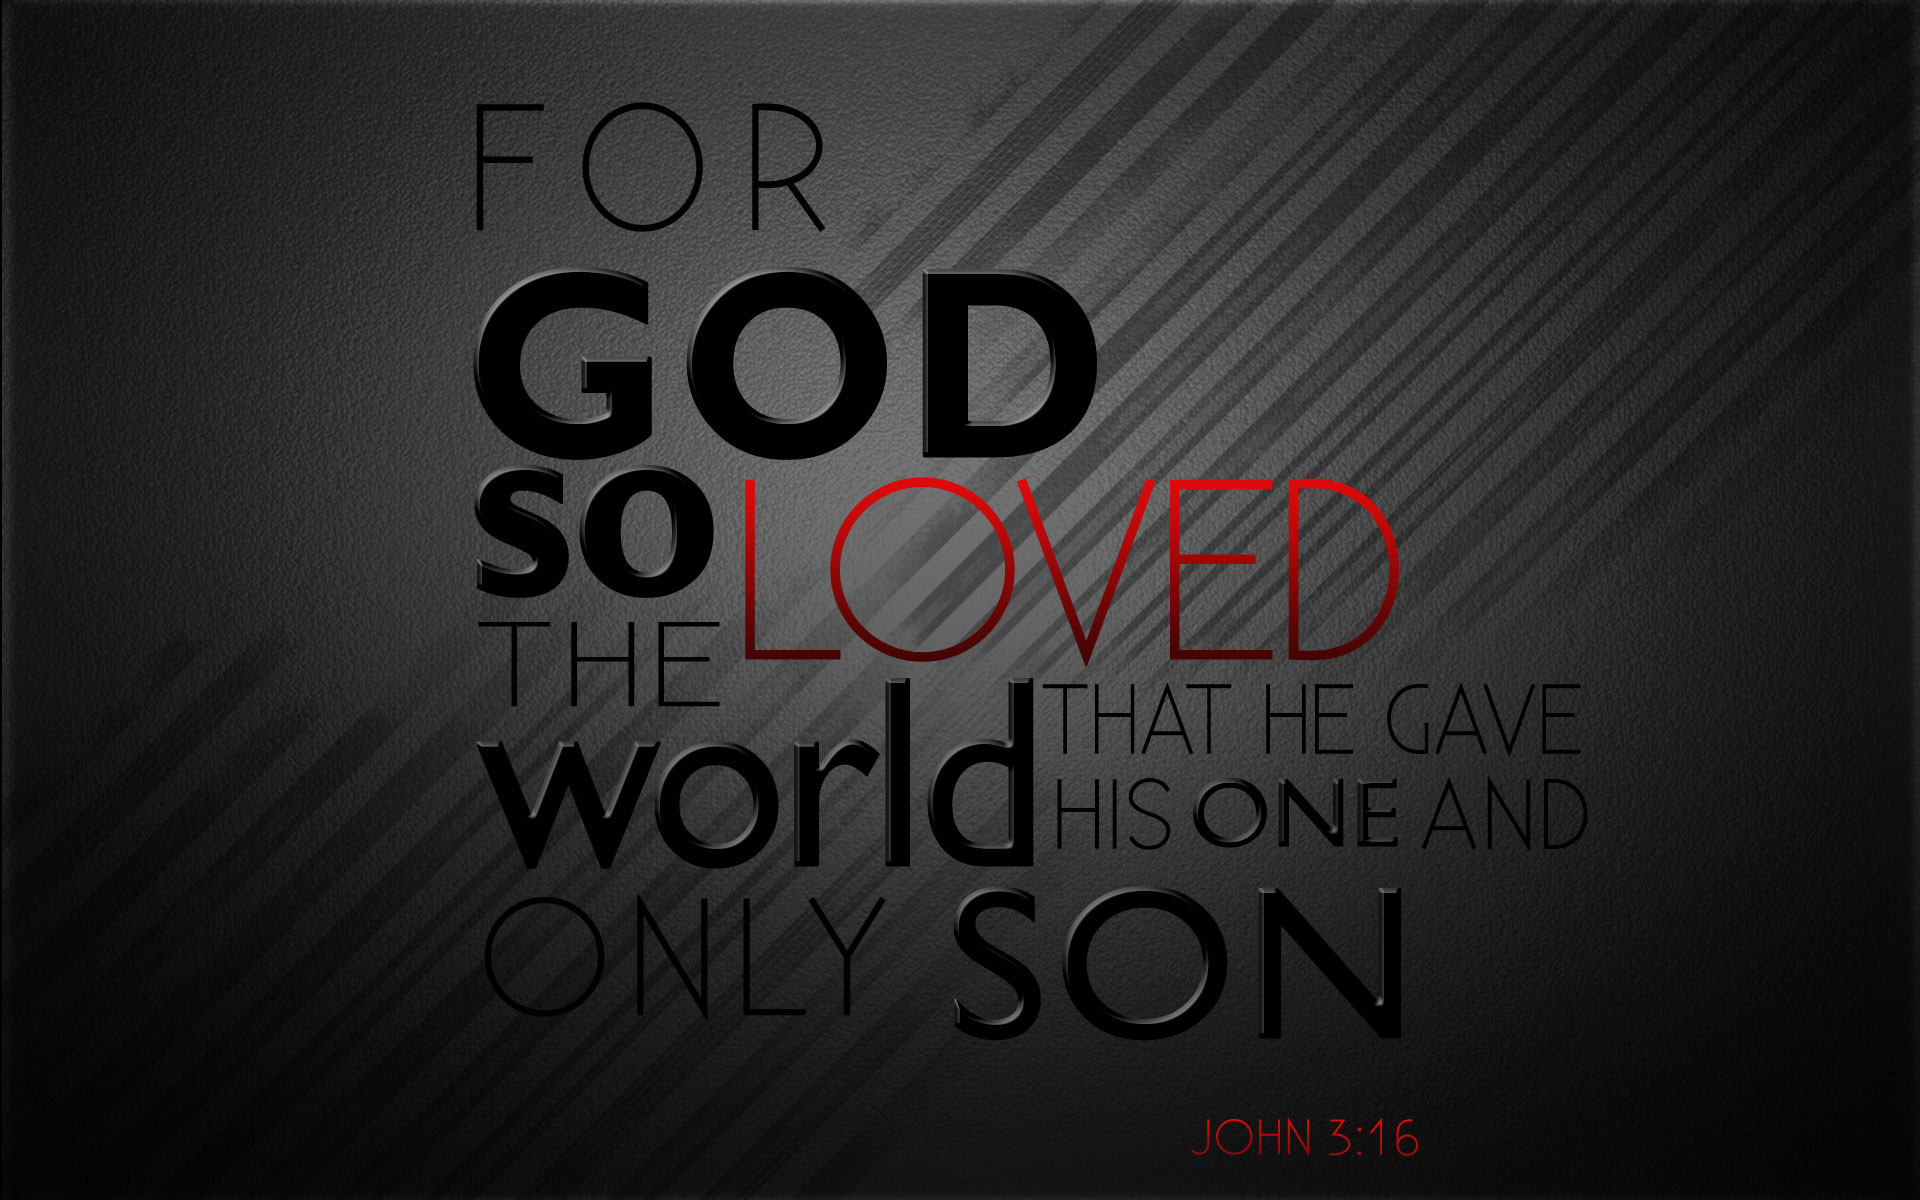 1920x1200 ... God-The creator images God's Love Letter wallpaper and background .